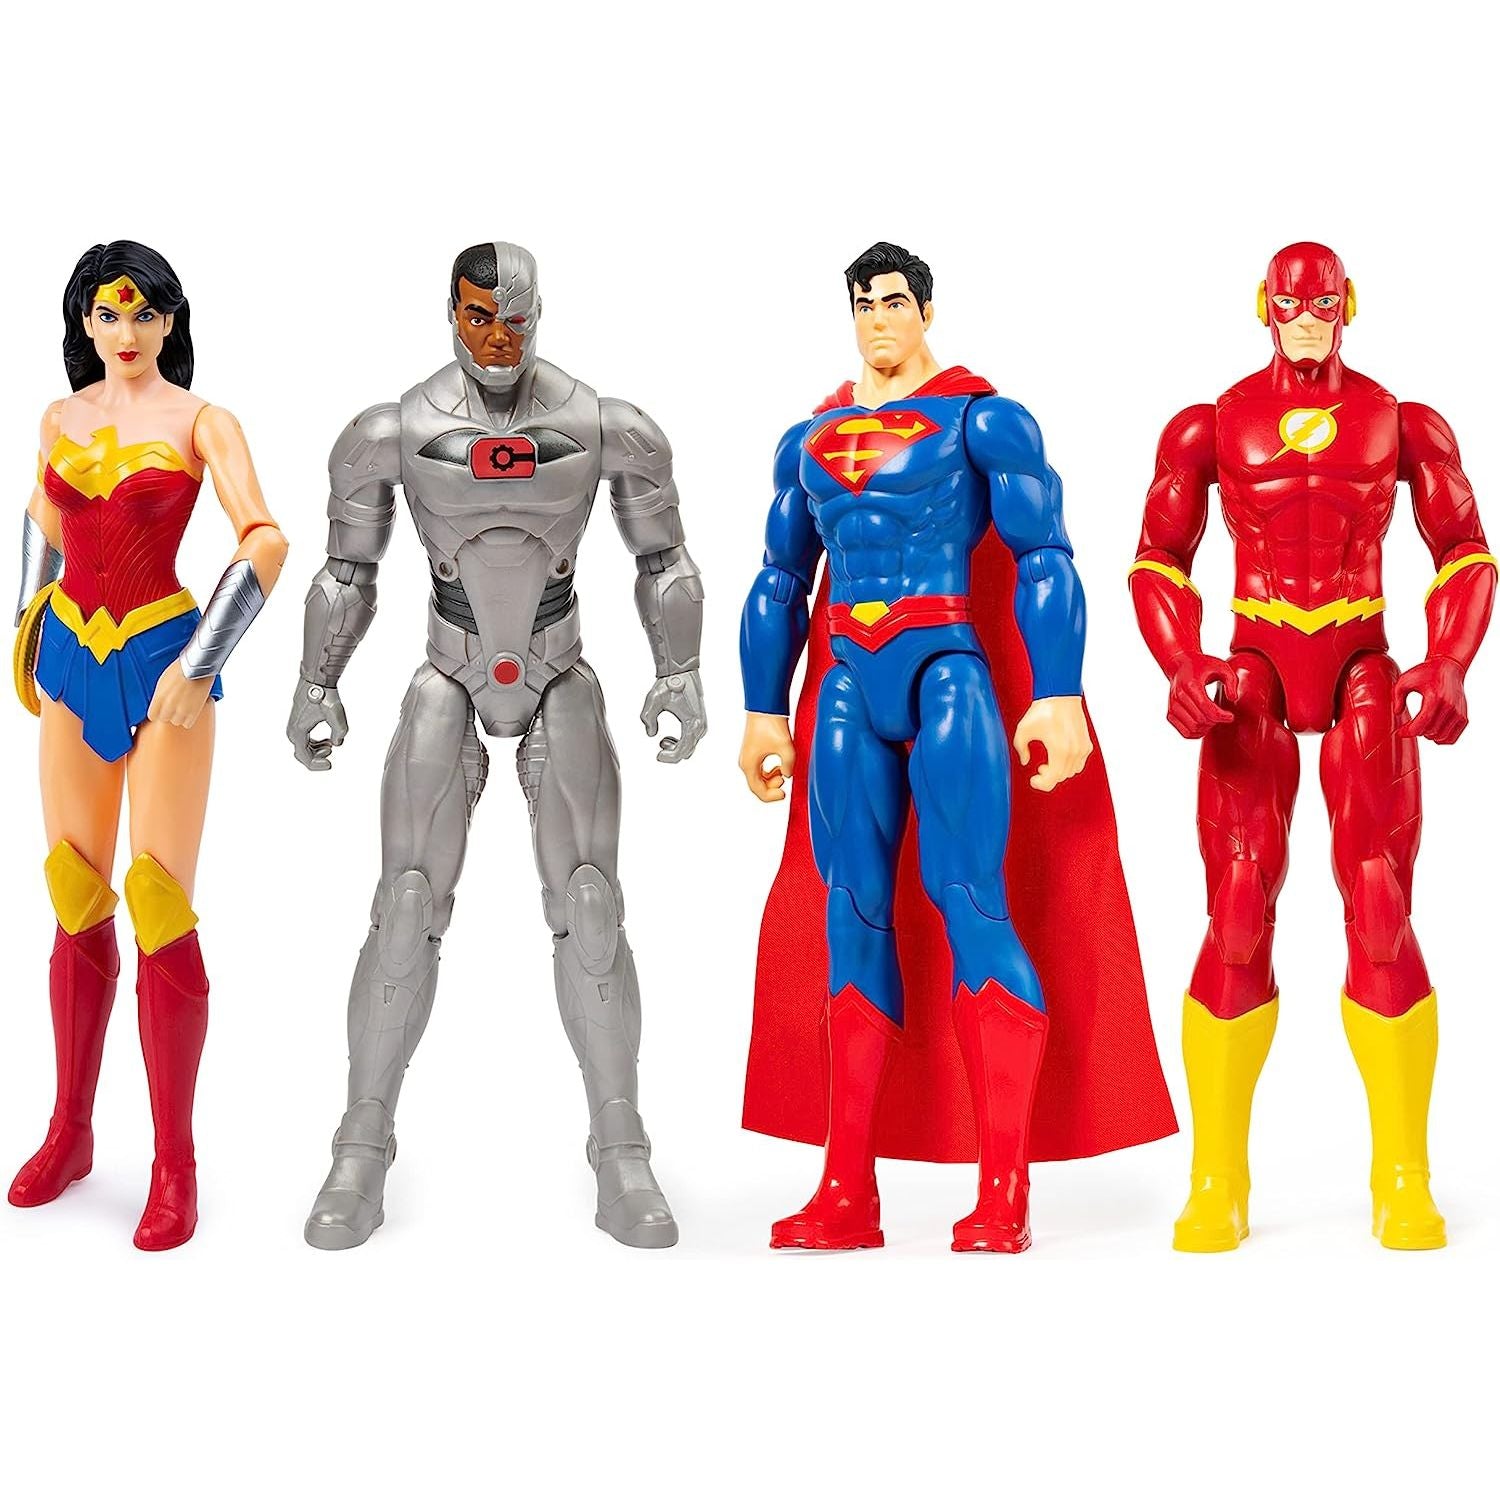 DC Comics 12-inch Action Figure 4-Pack with Superman, The Flash, Wonder Woman and Cyborg